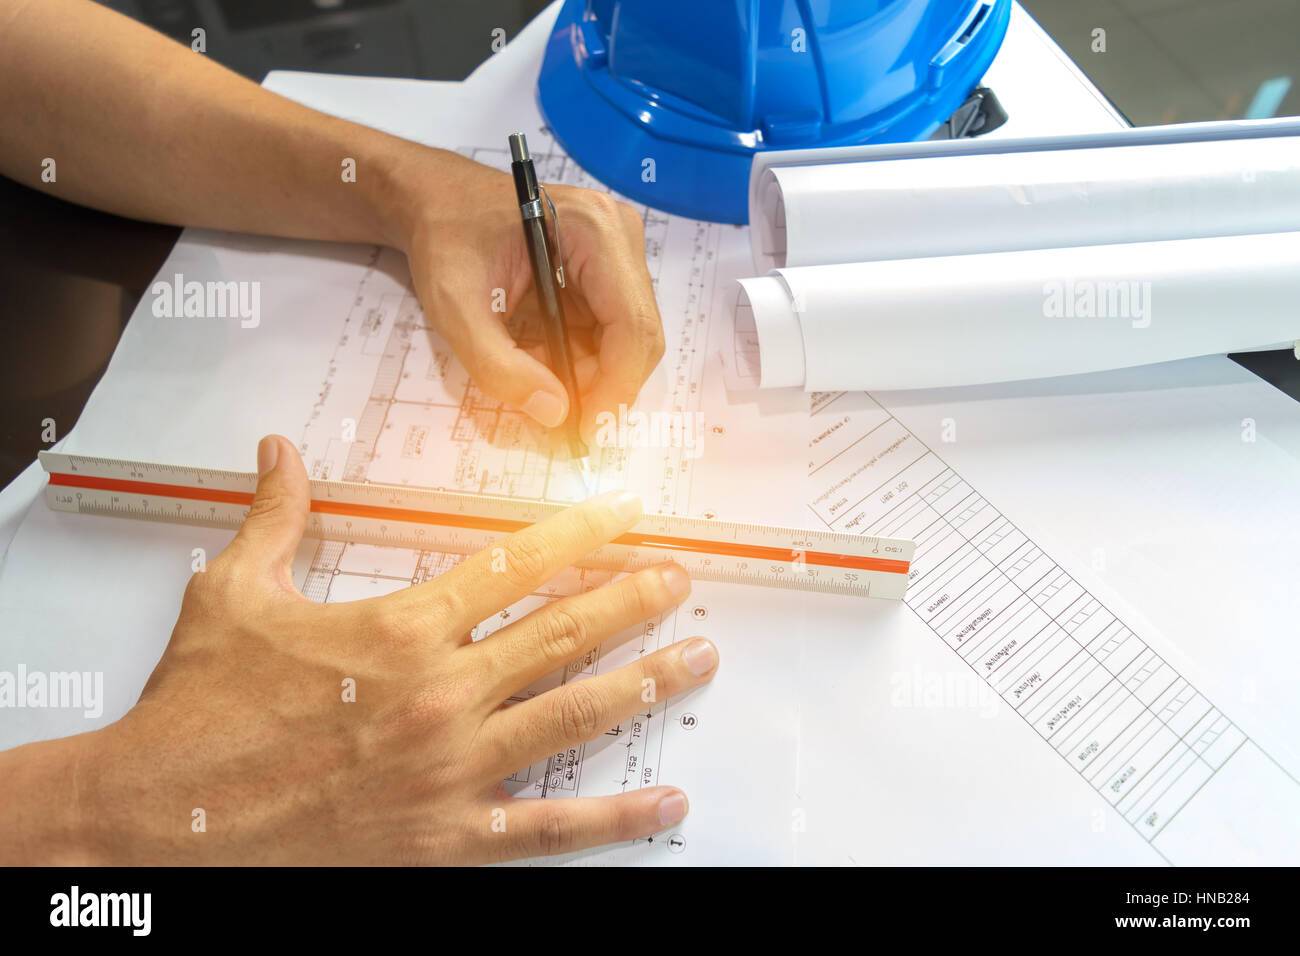 engineering diagram blueprint paper drafting project sketch architectural ,selective focus. Stock Photo